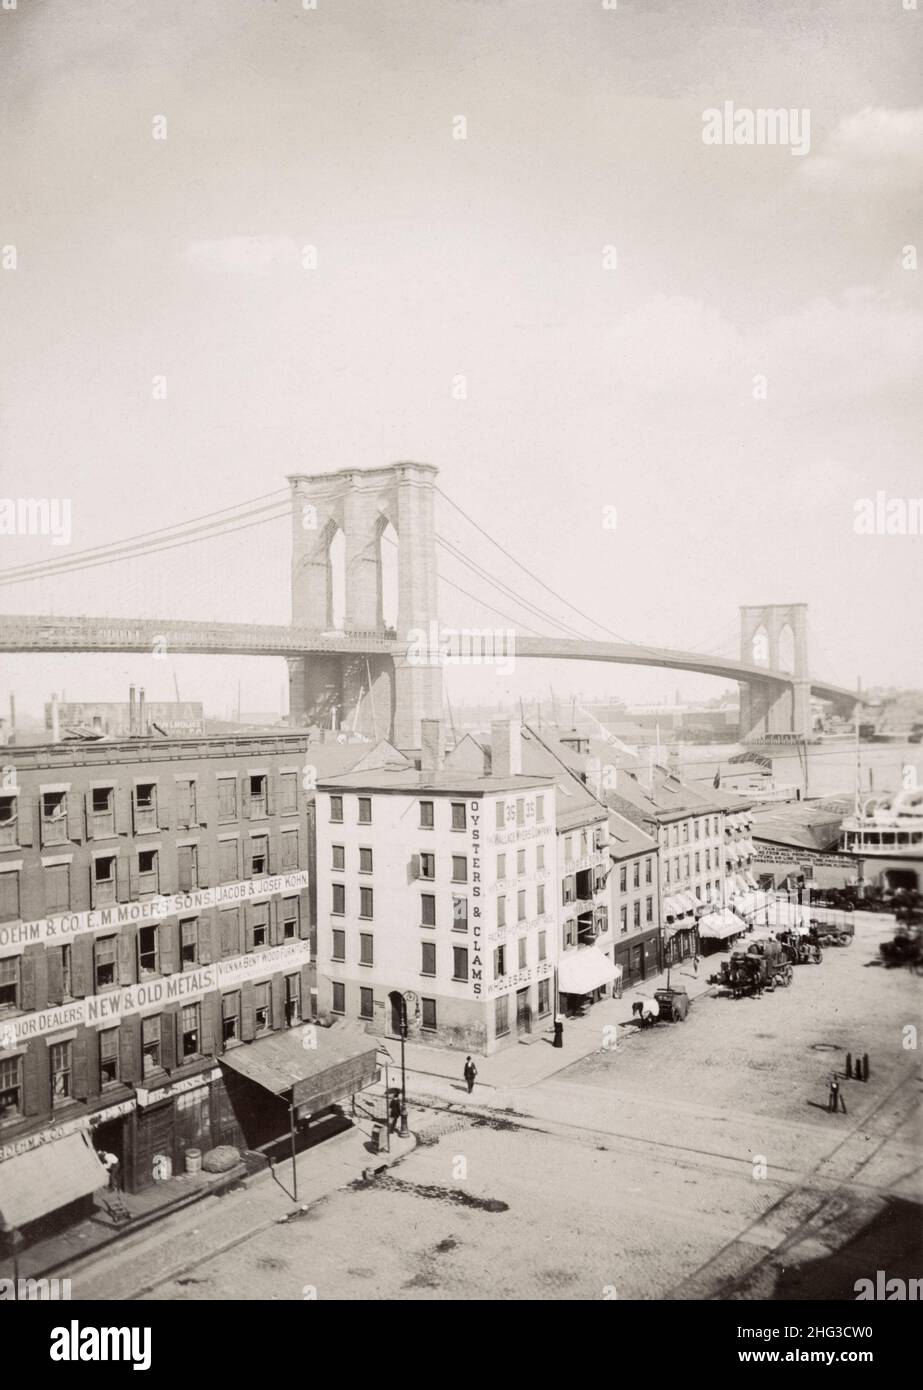 Vintage scenery of New Yourk and vicinity. The Brooklyn Bridge. USA. 1900s Vintage photo of the Brooklyn Bridge. Stock Photo